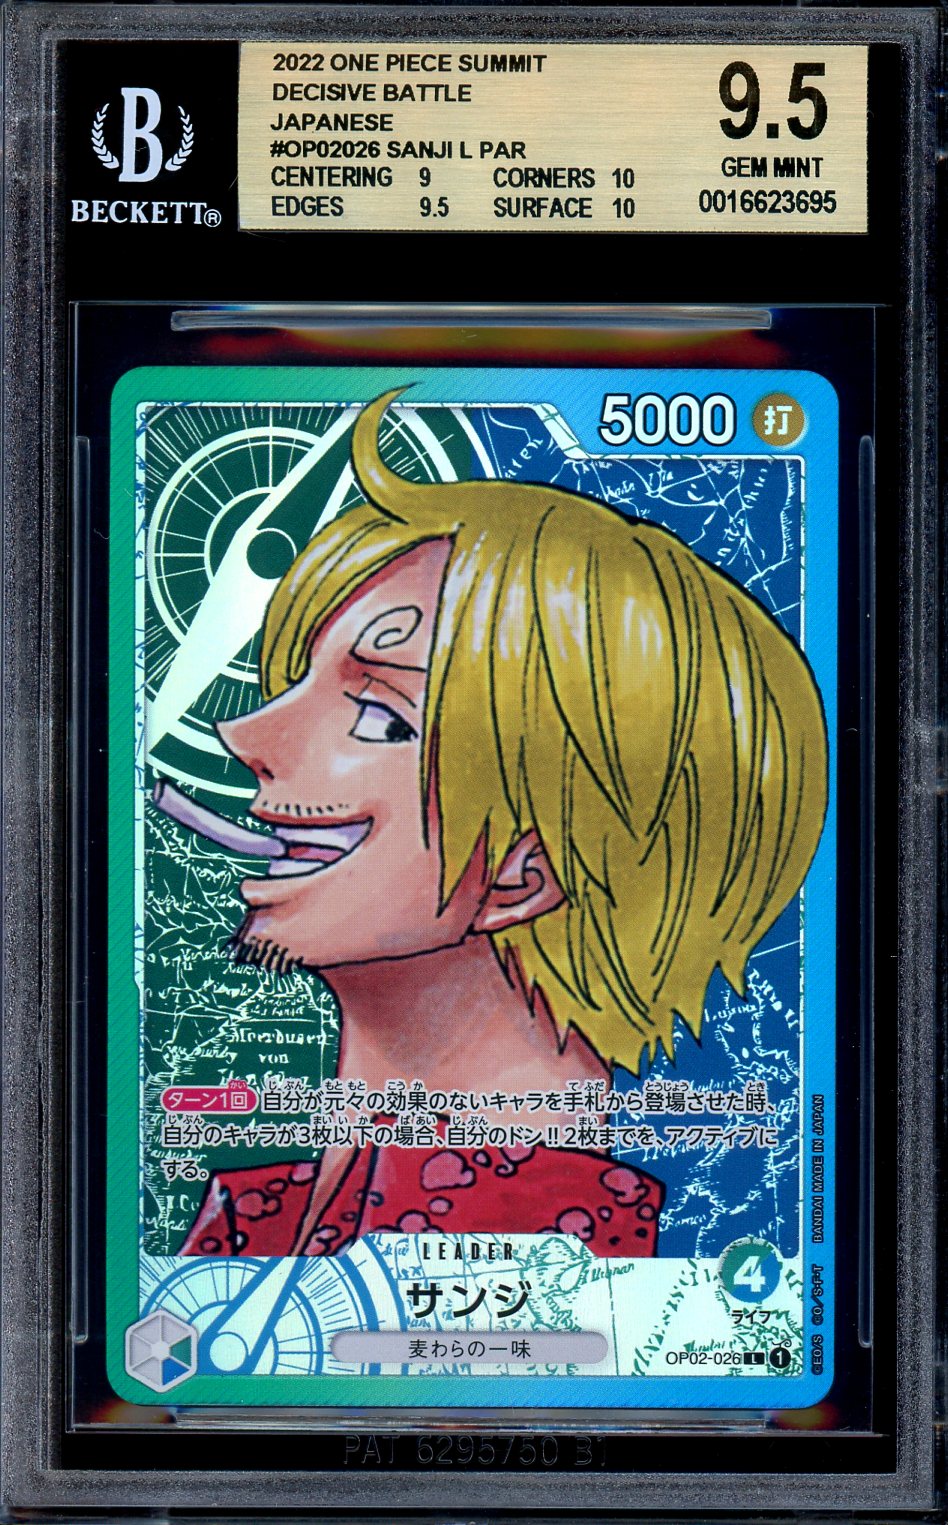 BGS Graded – Isle Collectibles